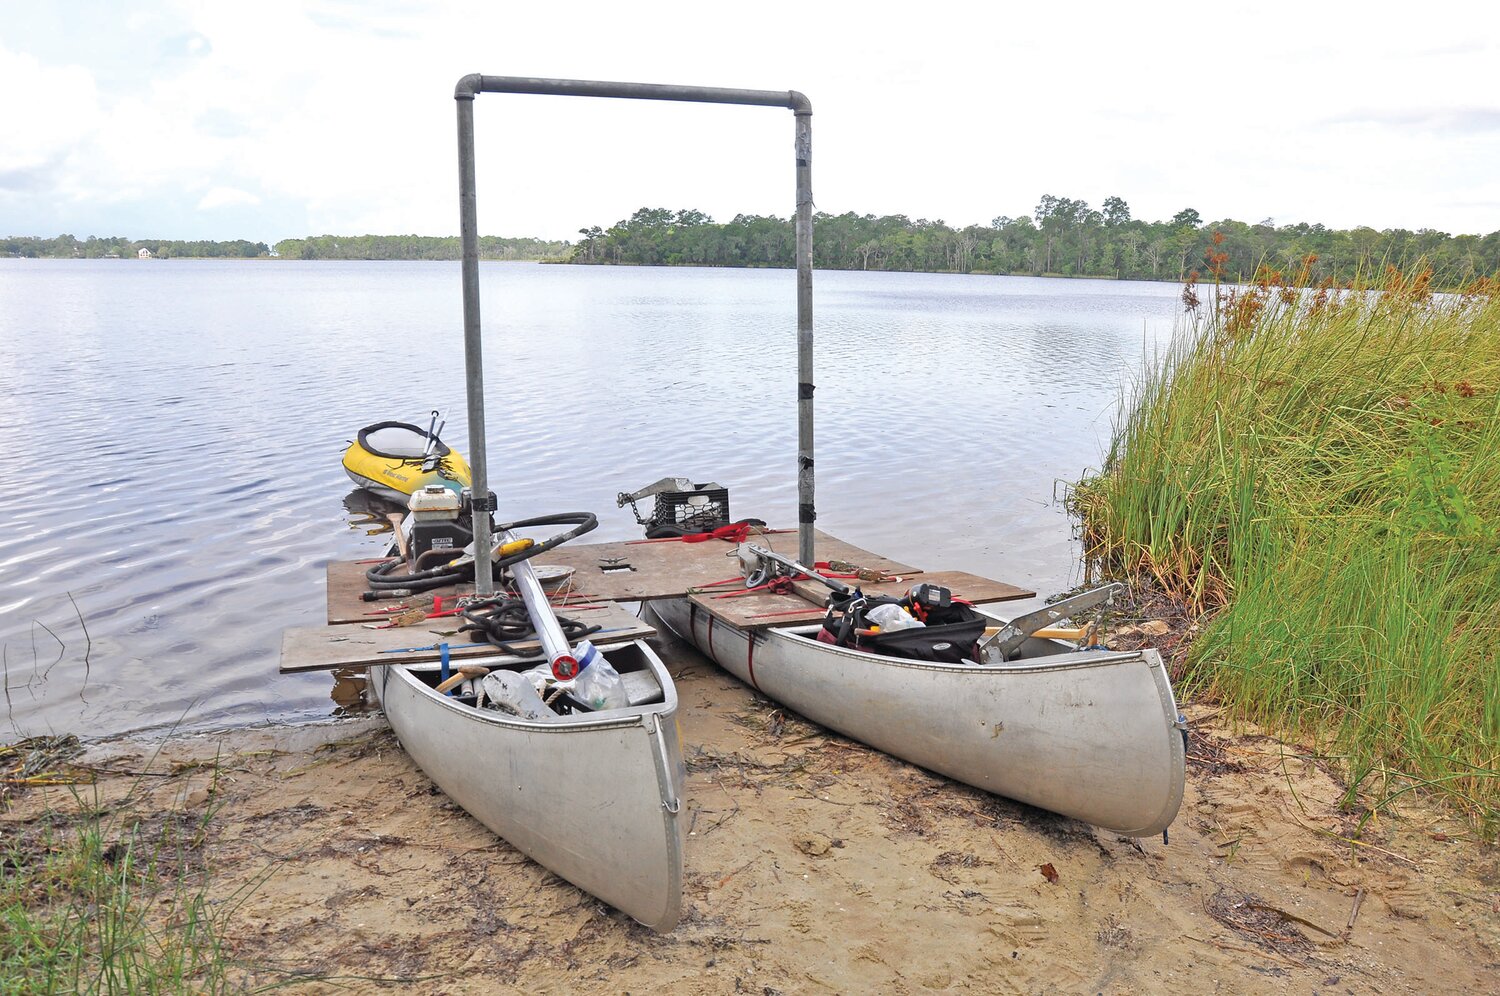 Equipment used by USGS scientists and partners to collect sediment cores at Basin Bayou in Florida. This is part of research by the USGS and partners to understand past hurricane activity in the Gulf of Mexico and northern Atlantic Ocean.